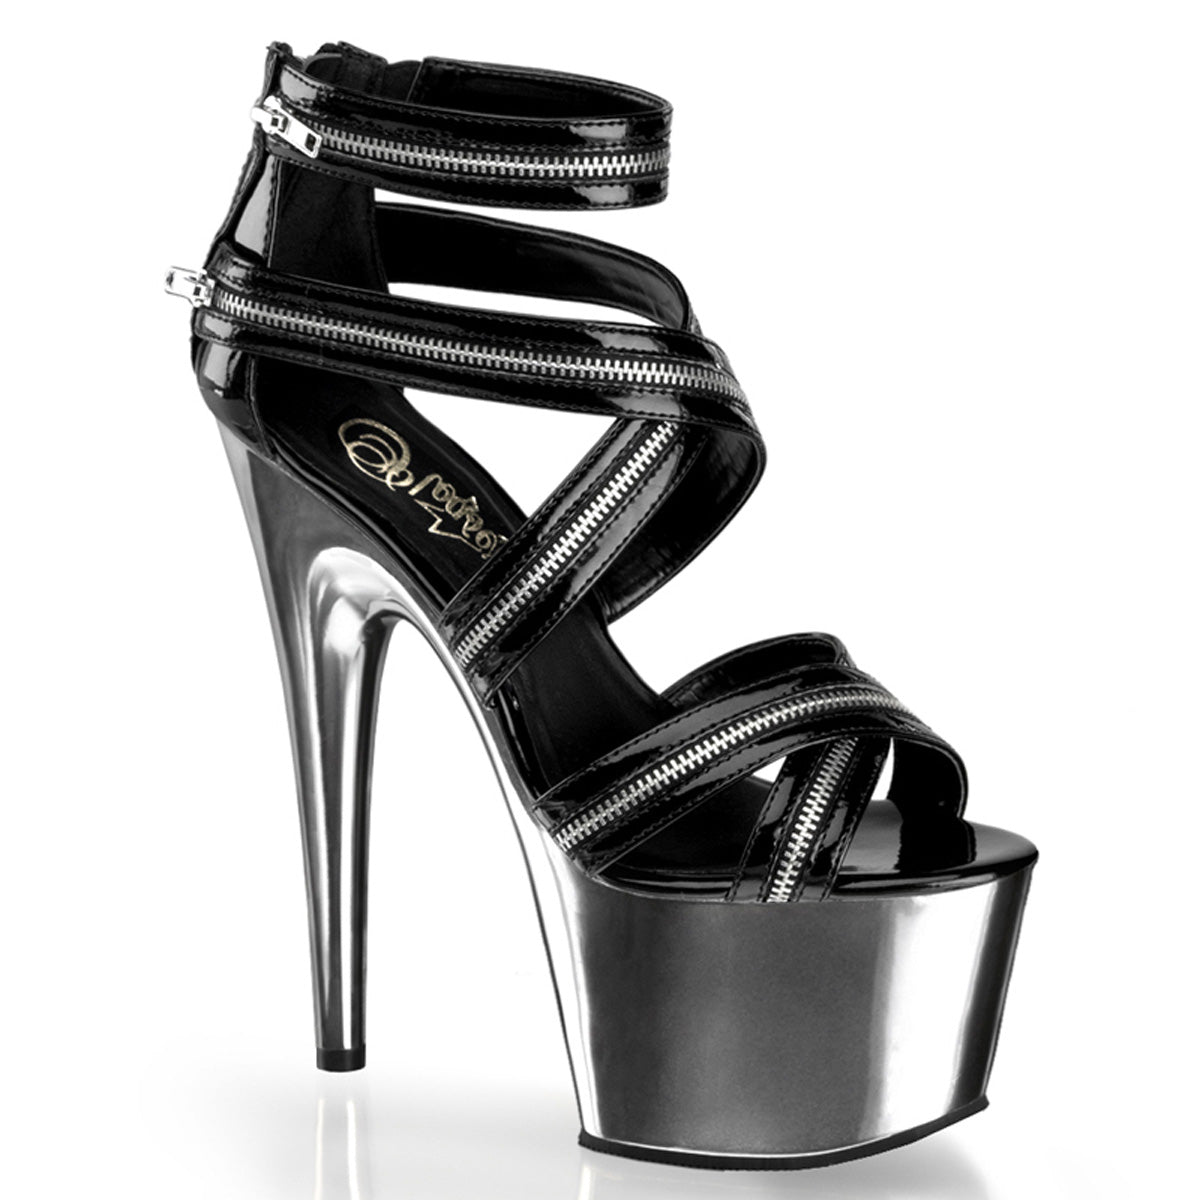 Pleaser Womens Sandals ADORE-767 Blk/Pewter Chrome